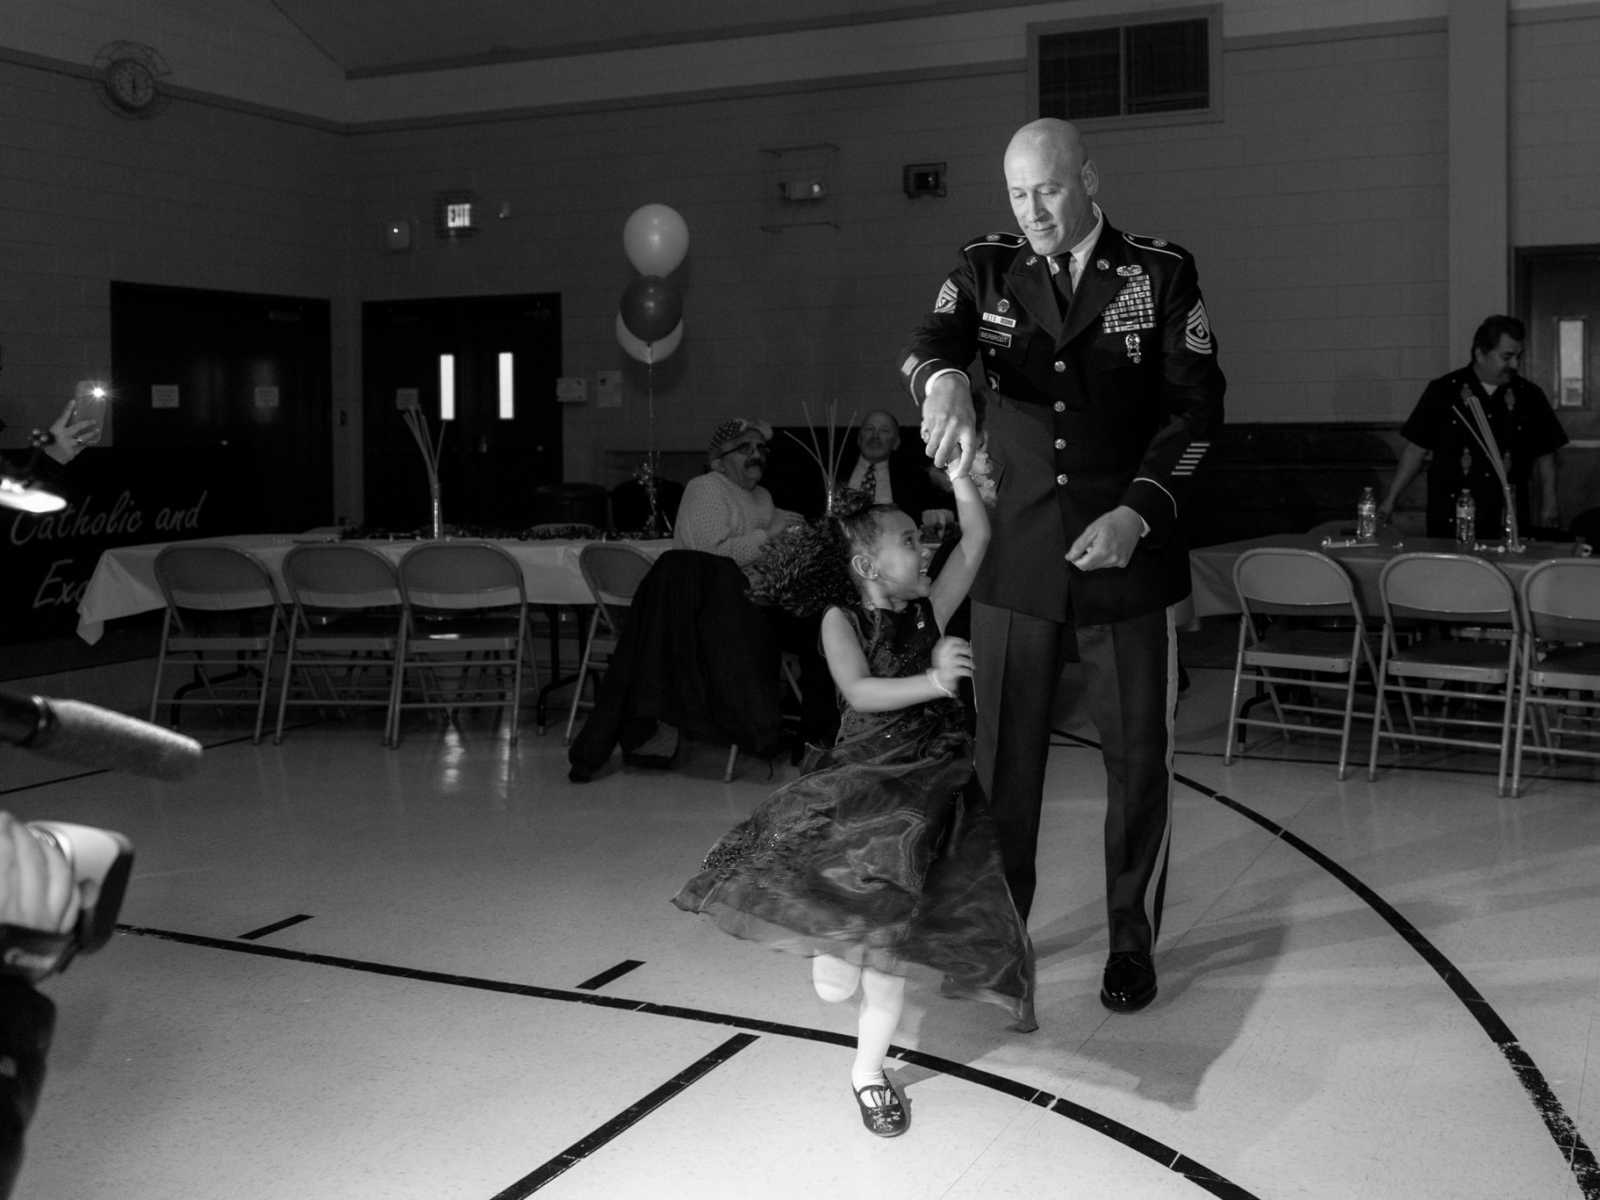 soldier twirling daughter in gymnasium with people in background watching in black and white